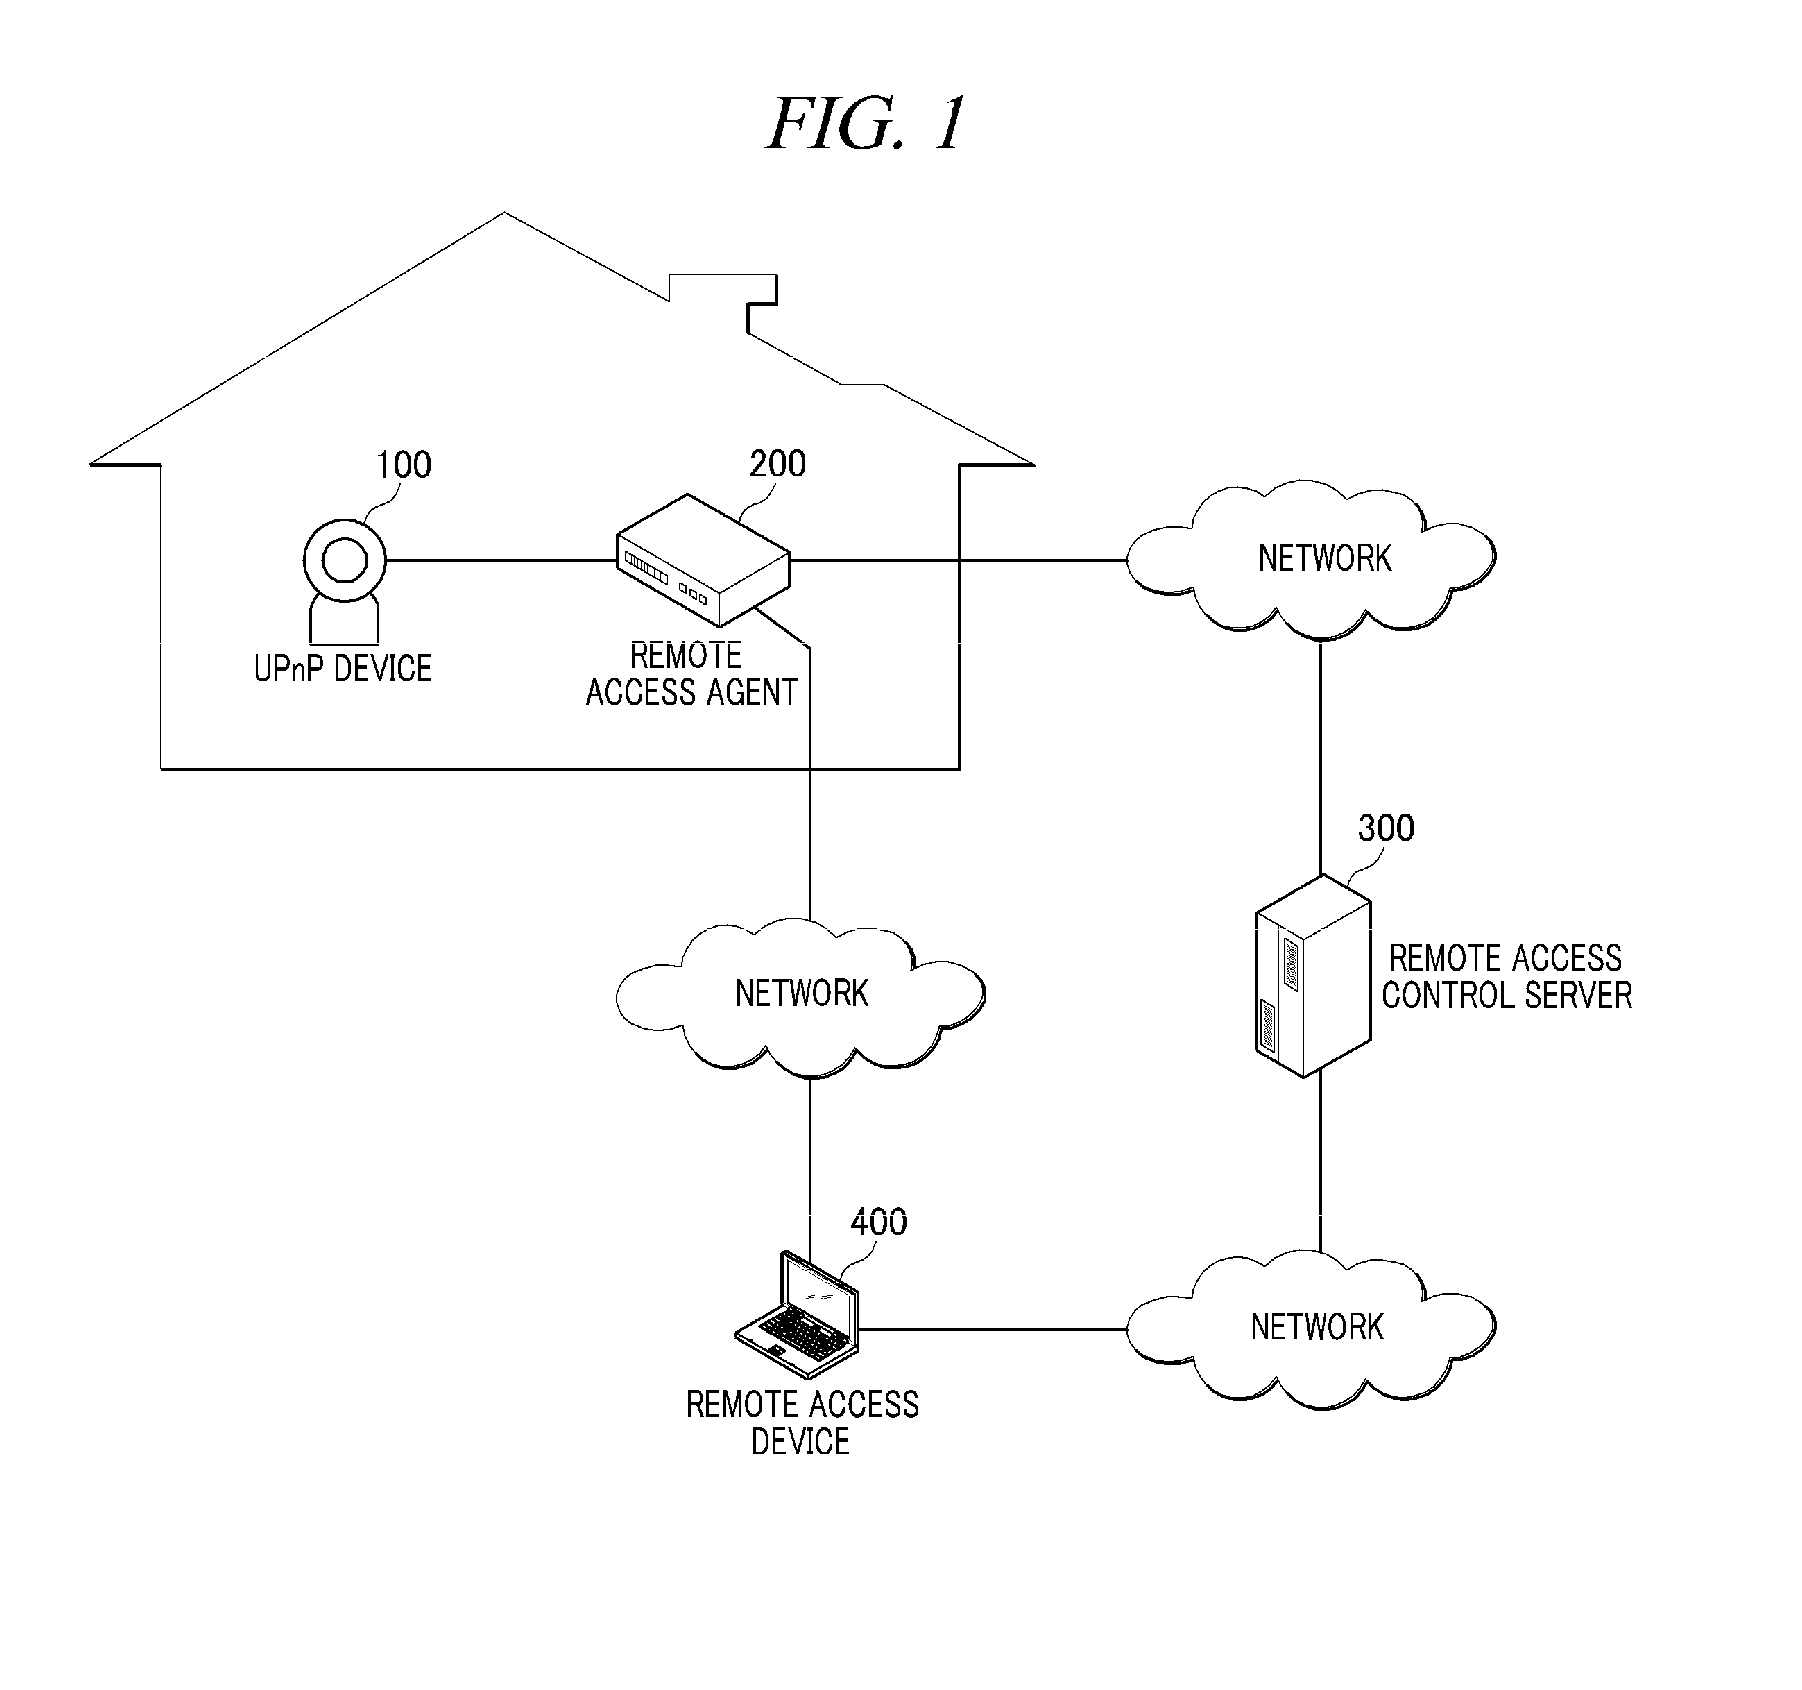 Method and system for allowing remote access device to access remote access target device within home network